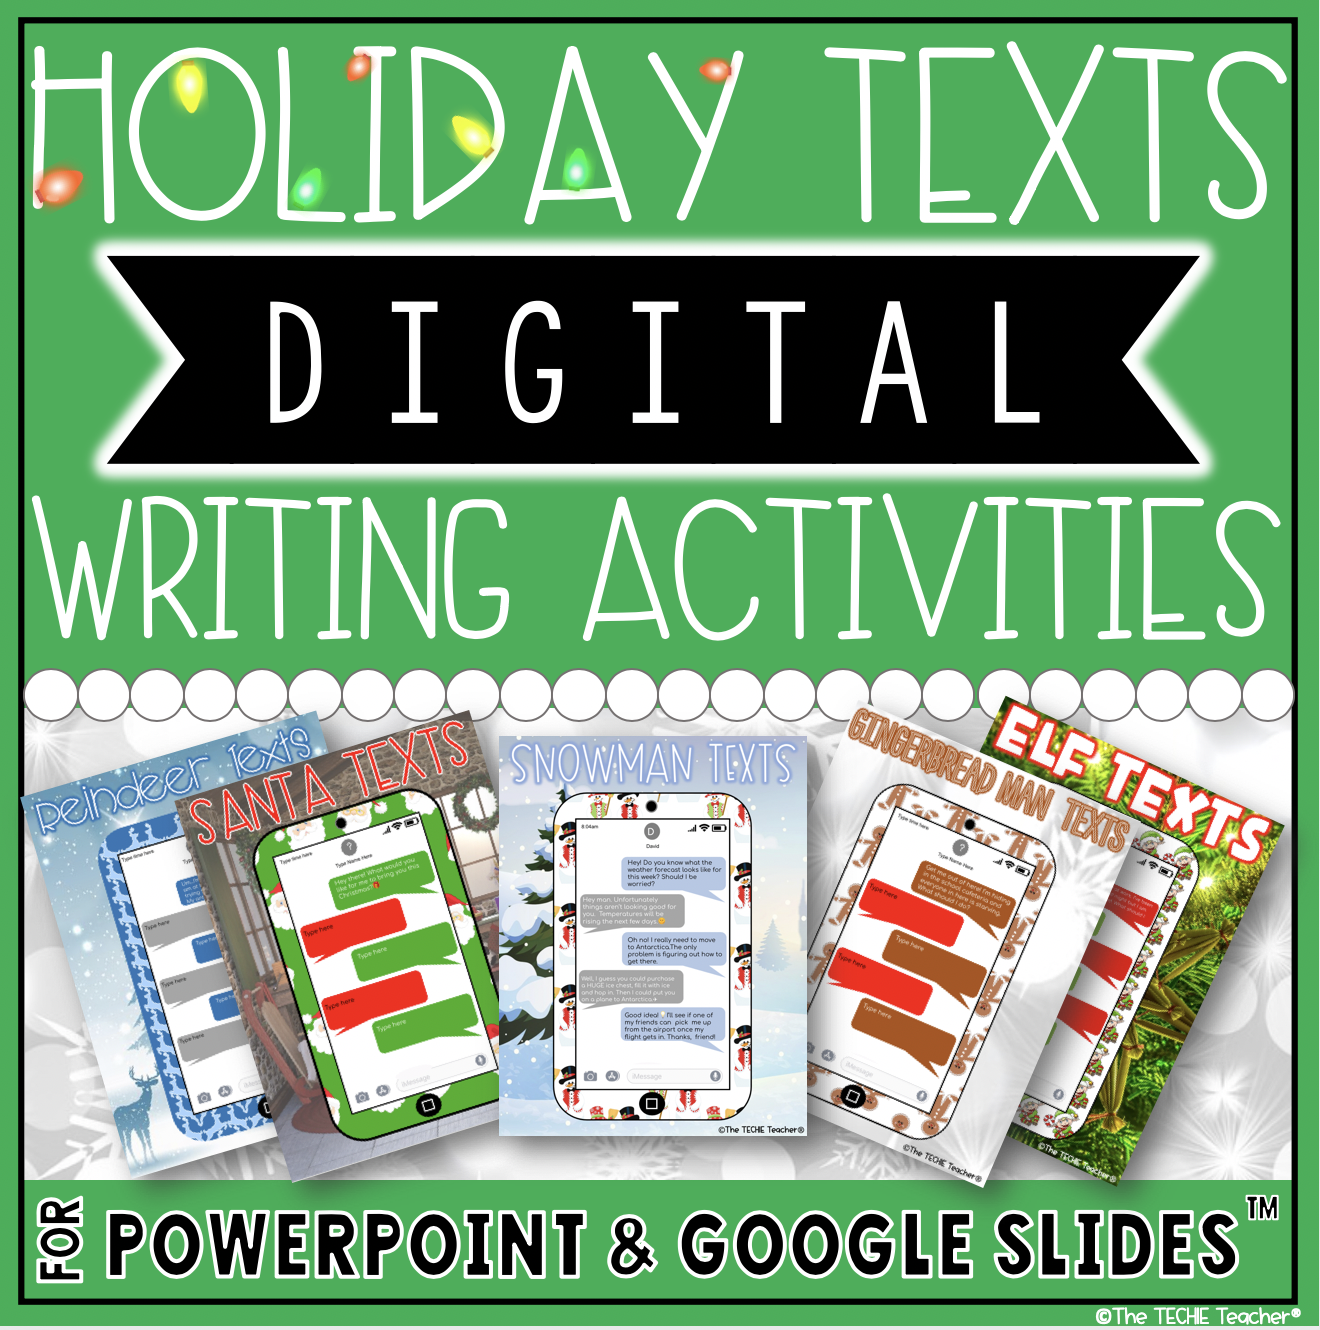 Holiday Texts for Google Slides and PowerPoint is a fun digital writing activity for the month of December. Come grab a free download for Snowman Texts and read about other "cell phones" for Santa, a reindeer, a gingerbread man and an elf.